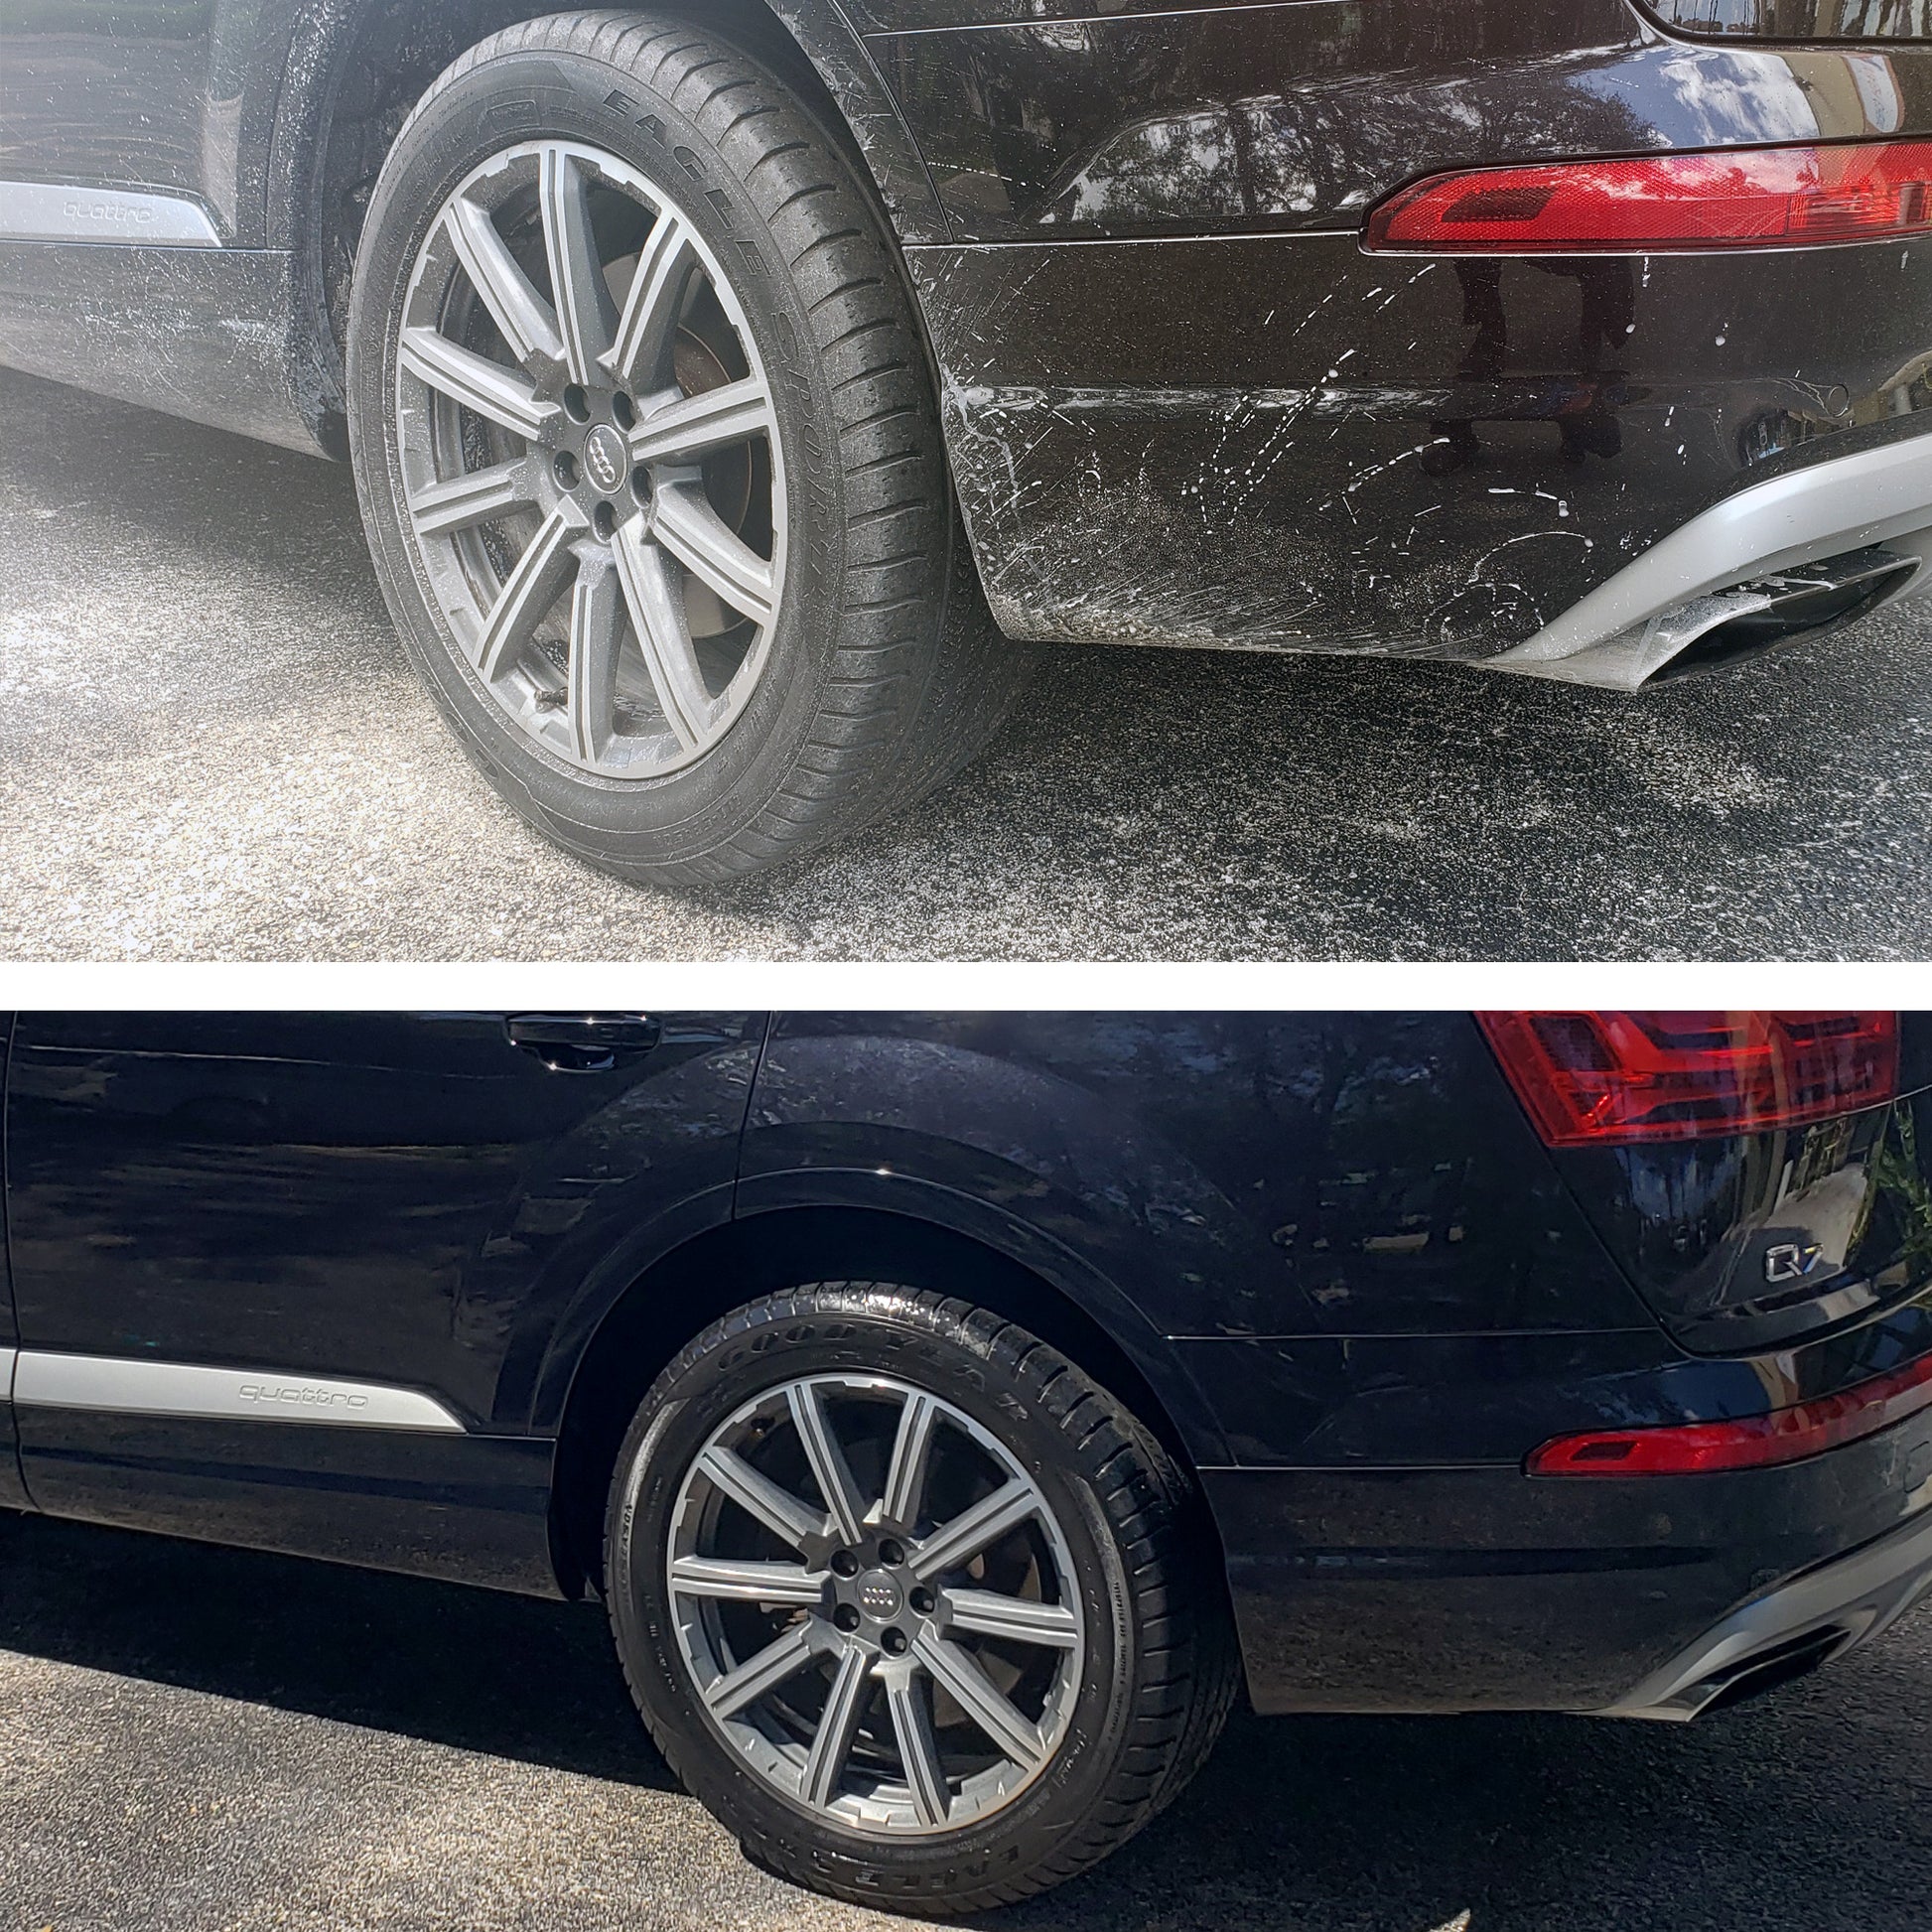 Total Wash Foam Cannon - Touchless Wash System 